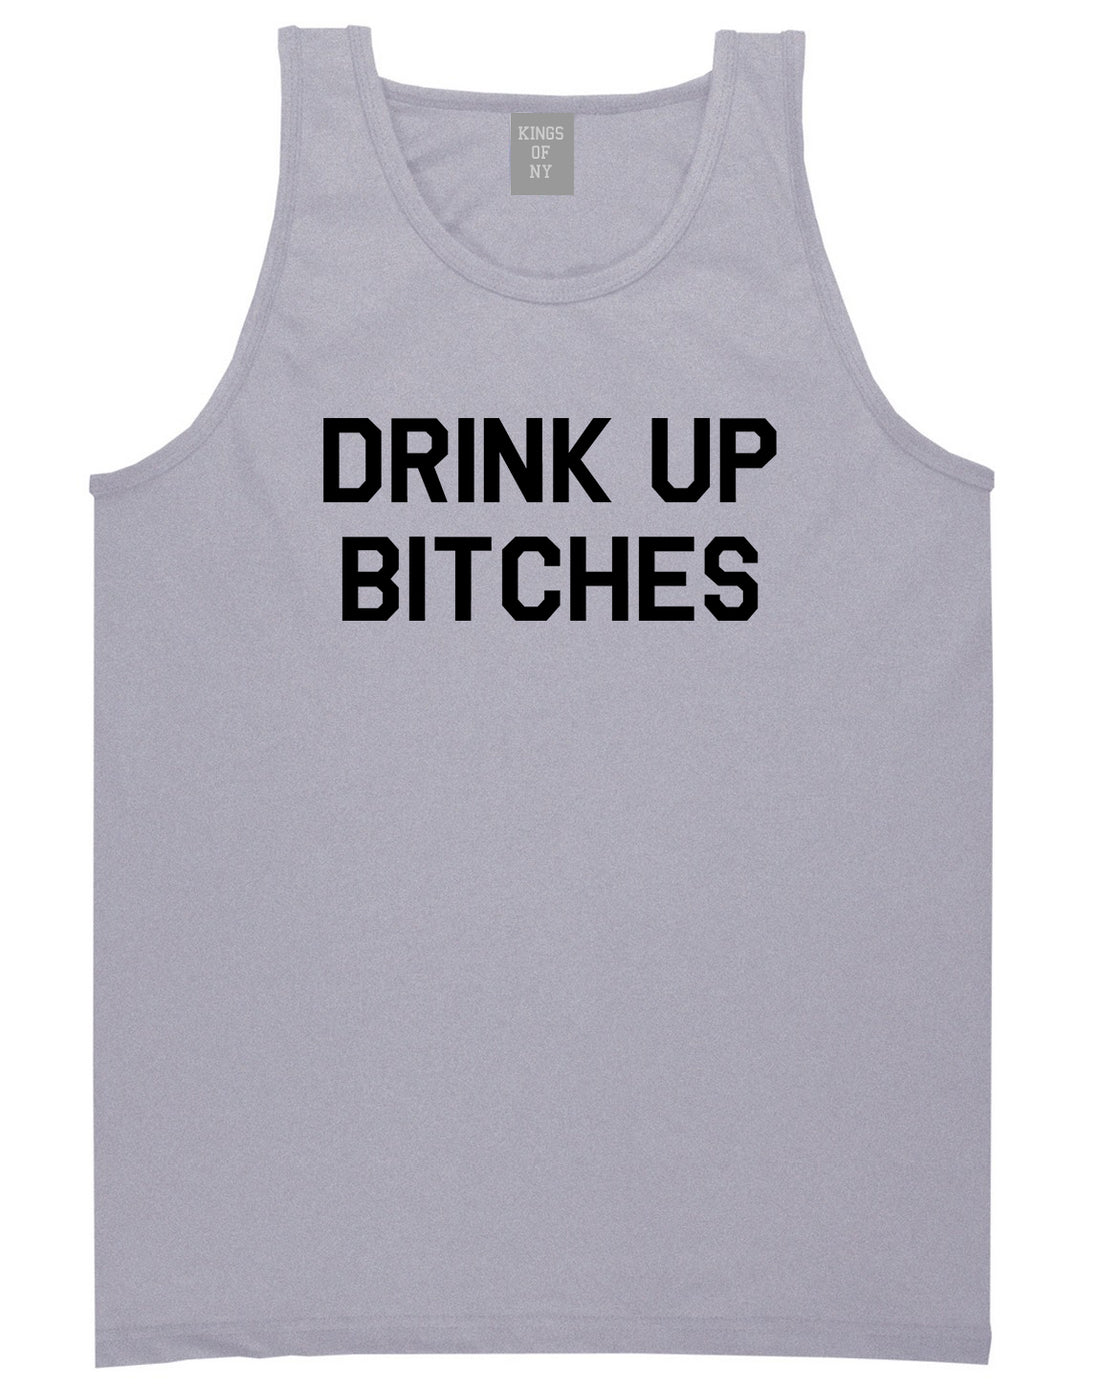 Drink_Up_Bitches Mens Grey Tank Top Shirt by Kings Of NY